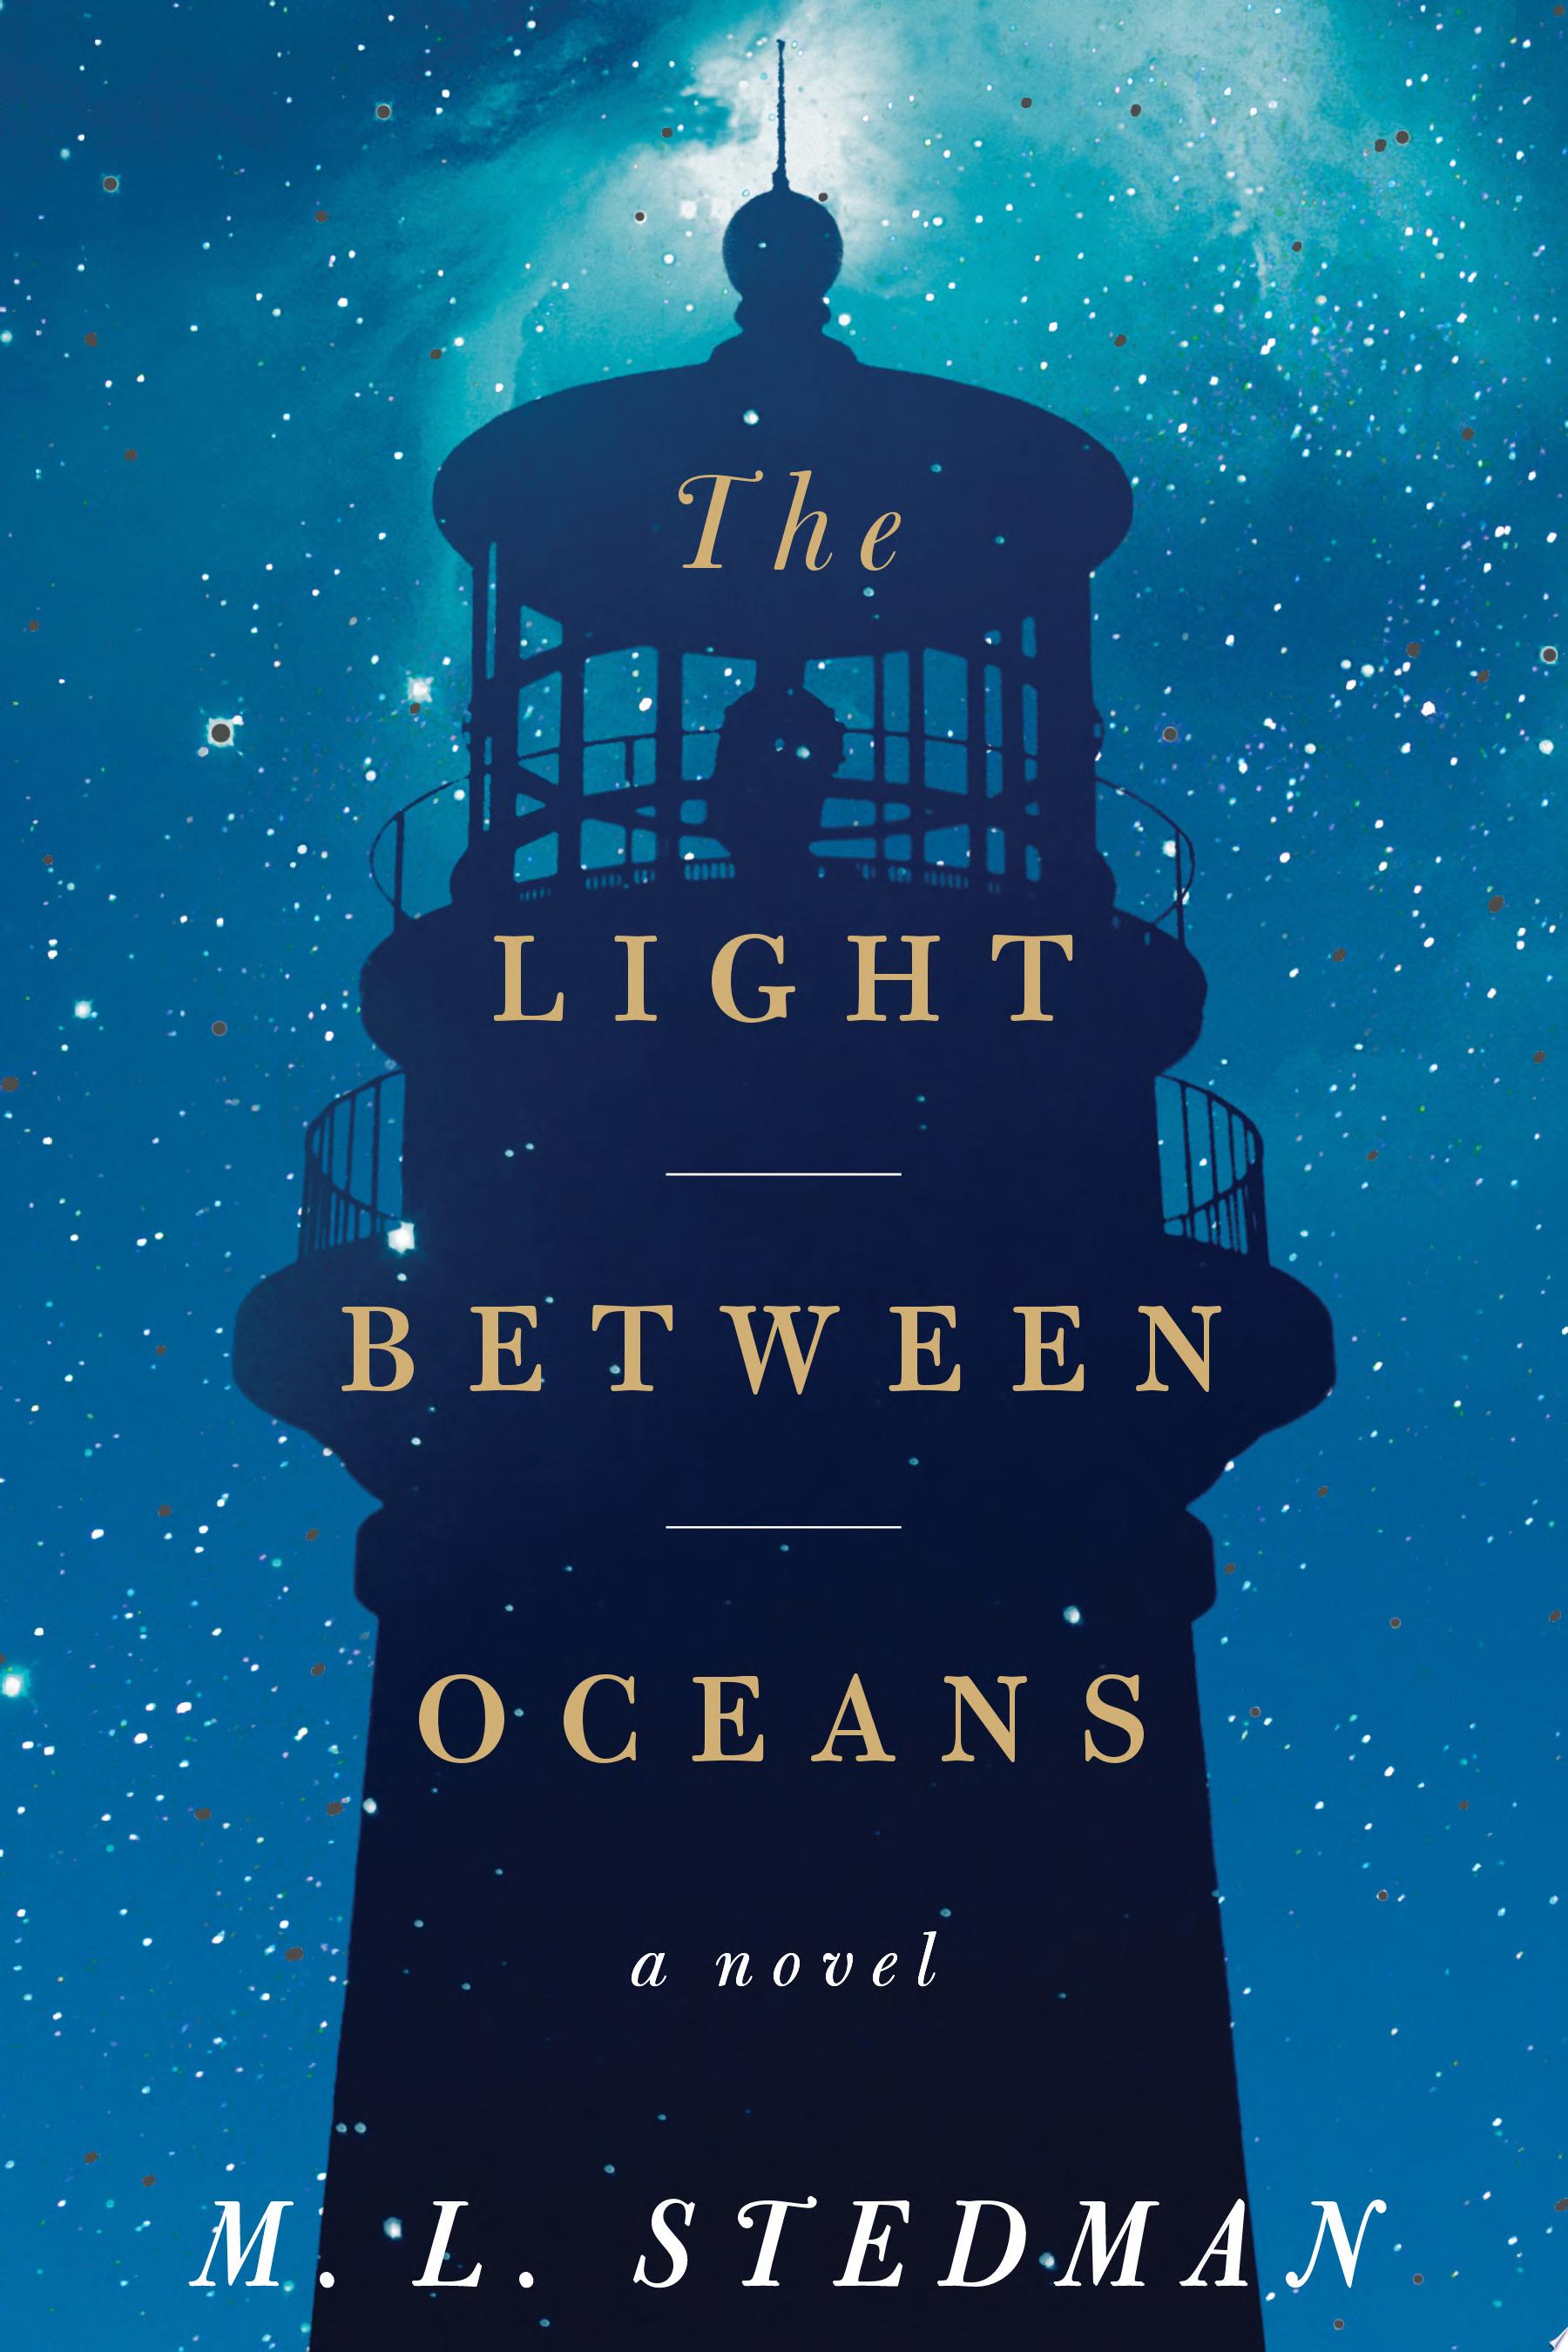 Image for "The Light Between Oceans"